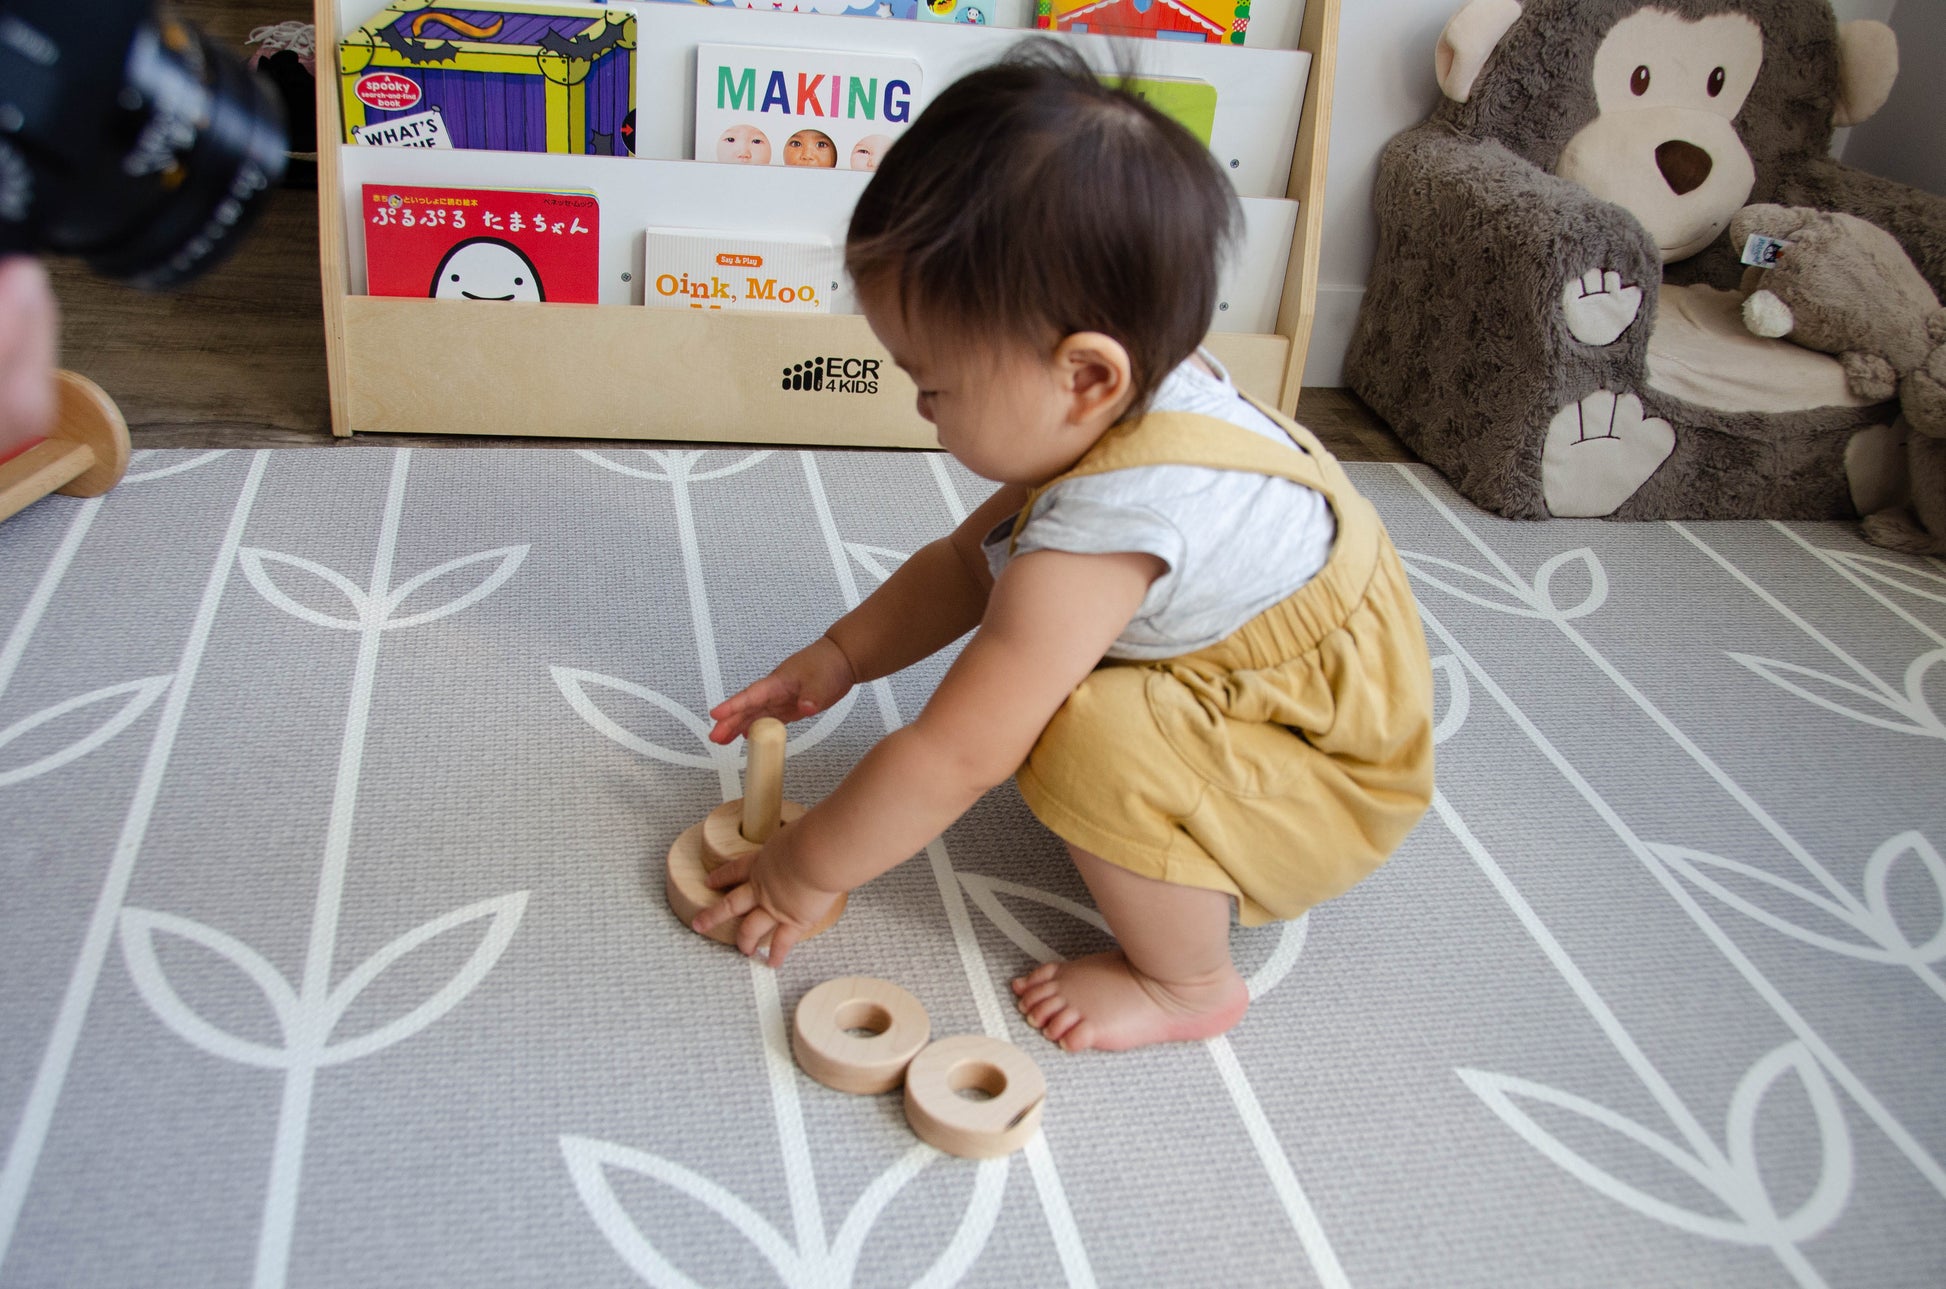 Adorable baby girl carefully placing the first ring on the Vertical Dowel, focusing her attention and honing her fine motor skills as she engages in delightful playtime exploration.